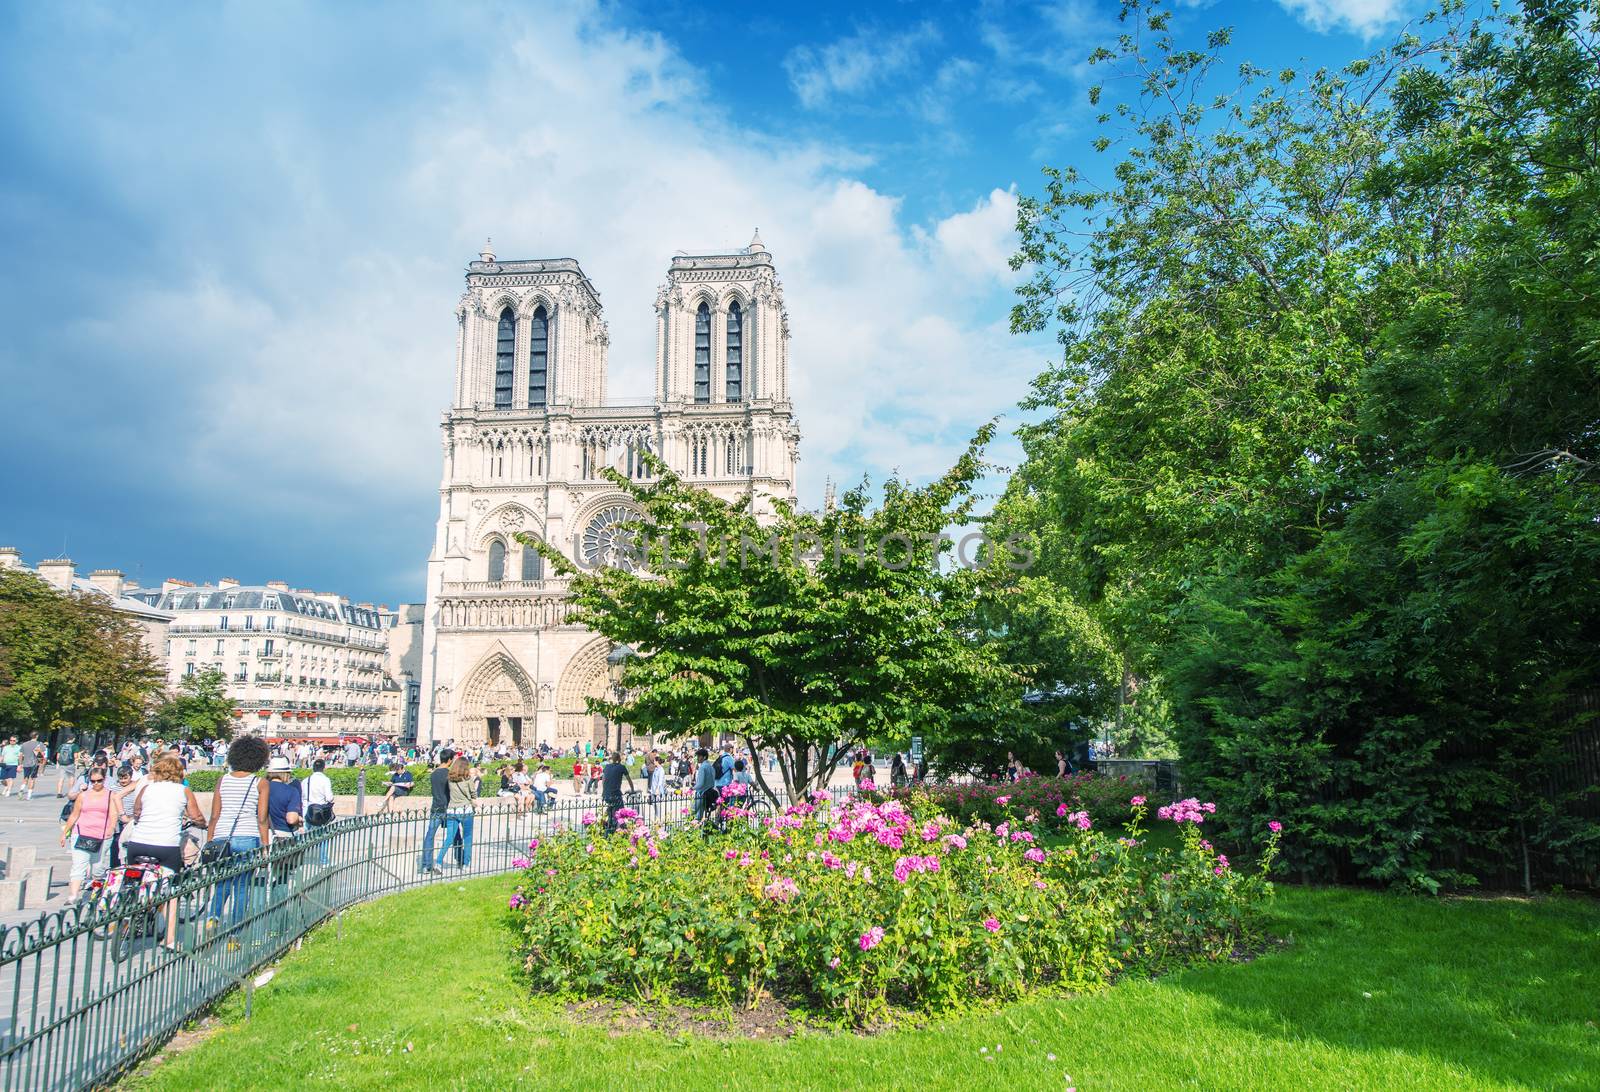 PARIS - JUNE 14, 2014: Tourists visit Notre Dame. More than 30 million people visit the city every year.